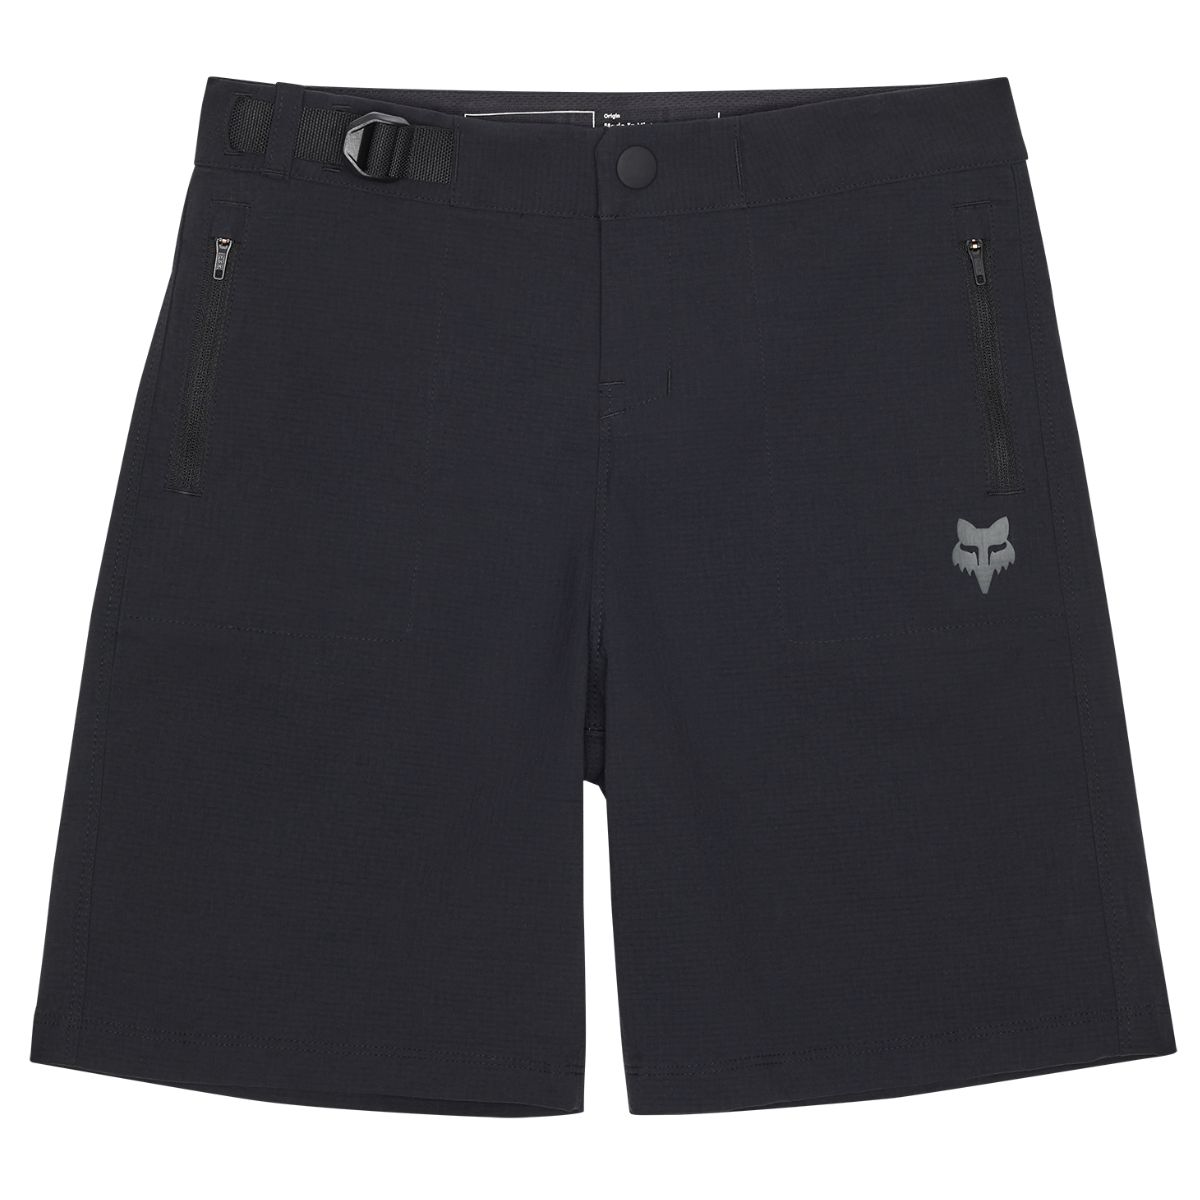 Fox Ranger shorts with lining for children